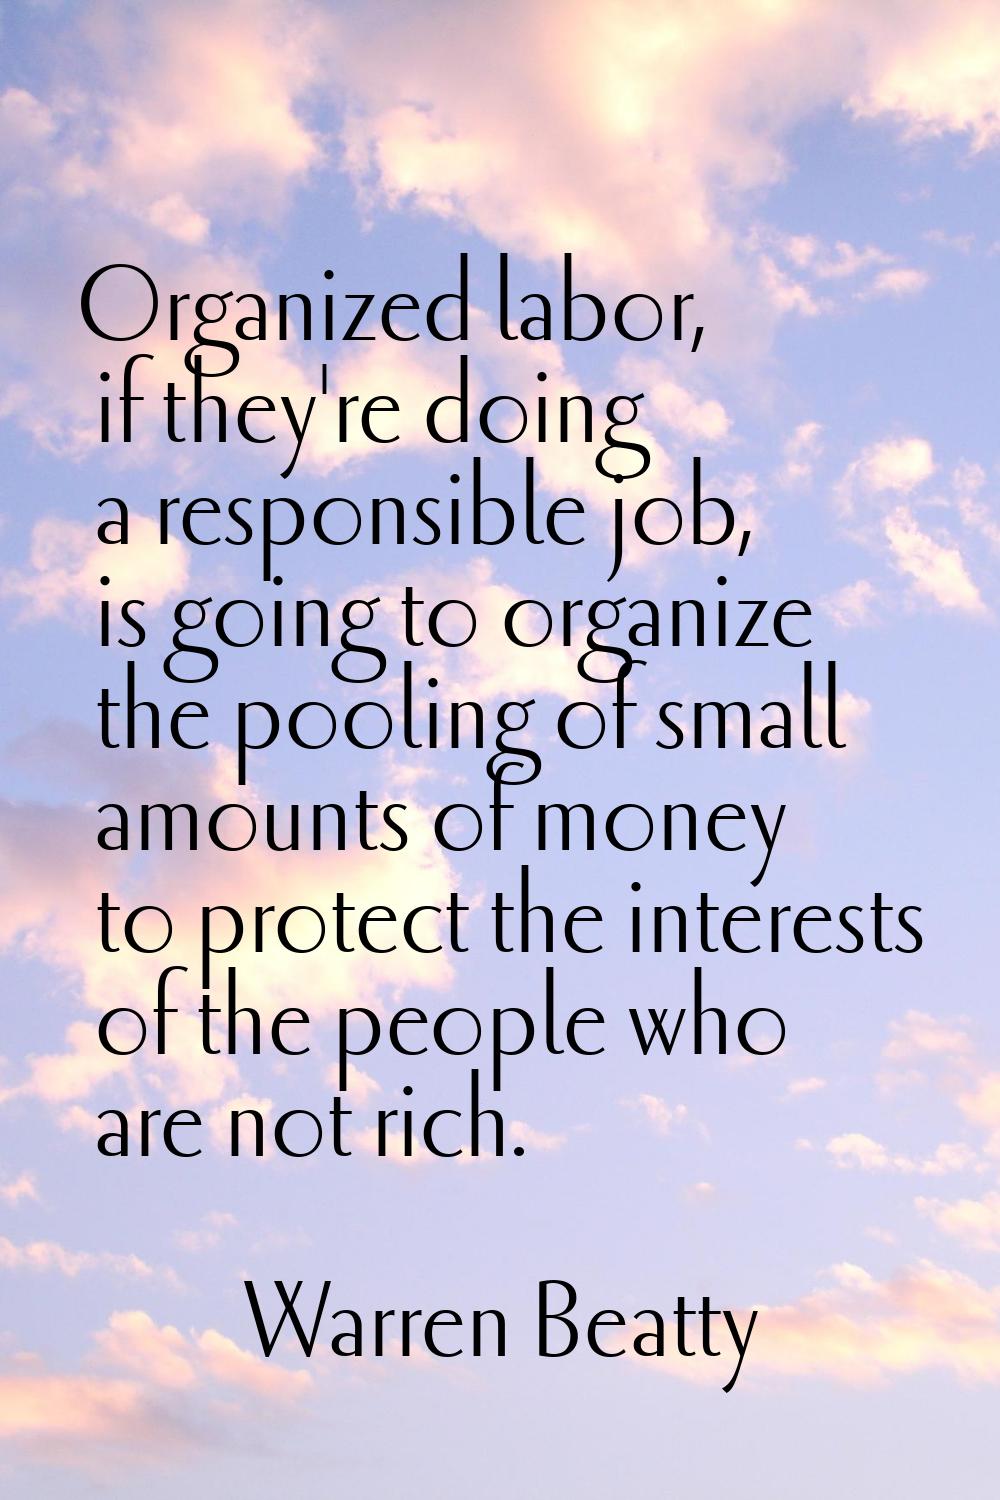 Organized labor, if they're doing a responsible job, is going to organize the pooling of small amou